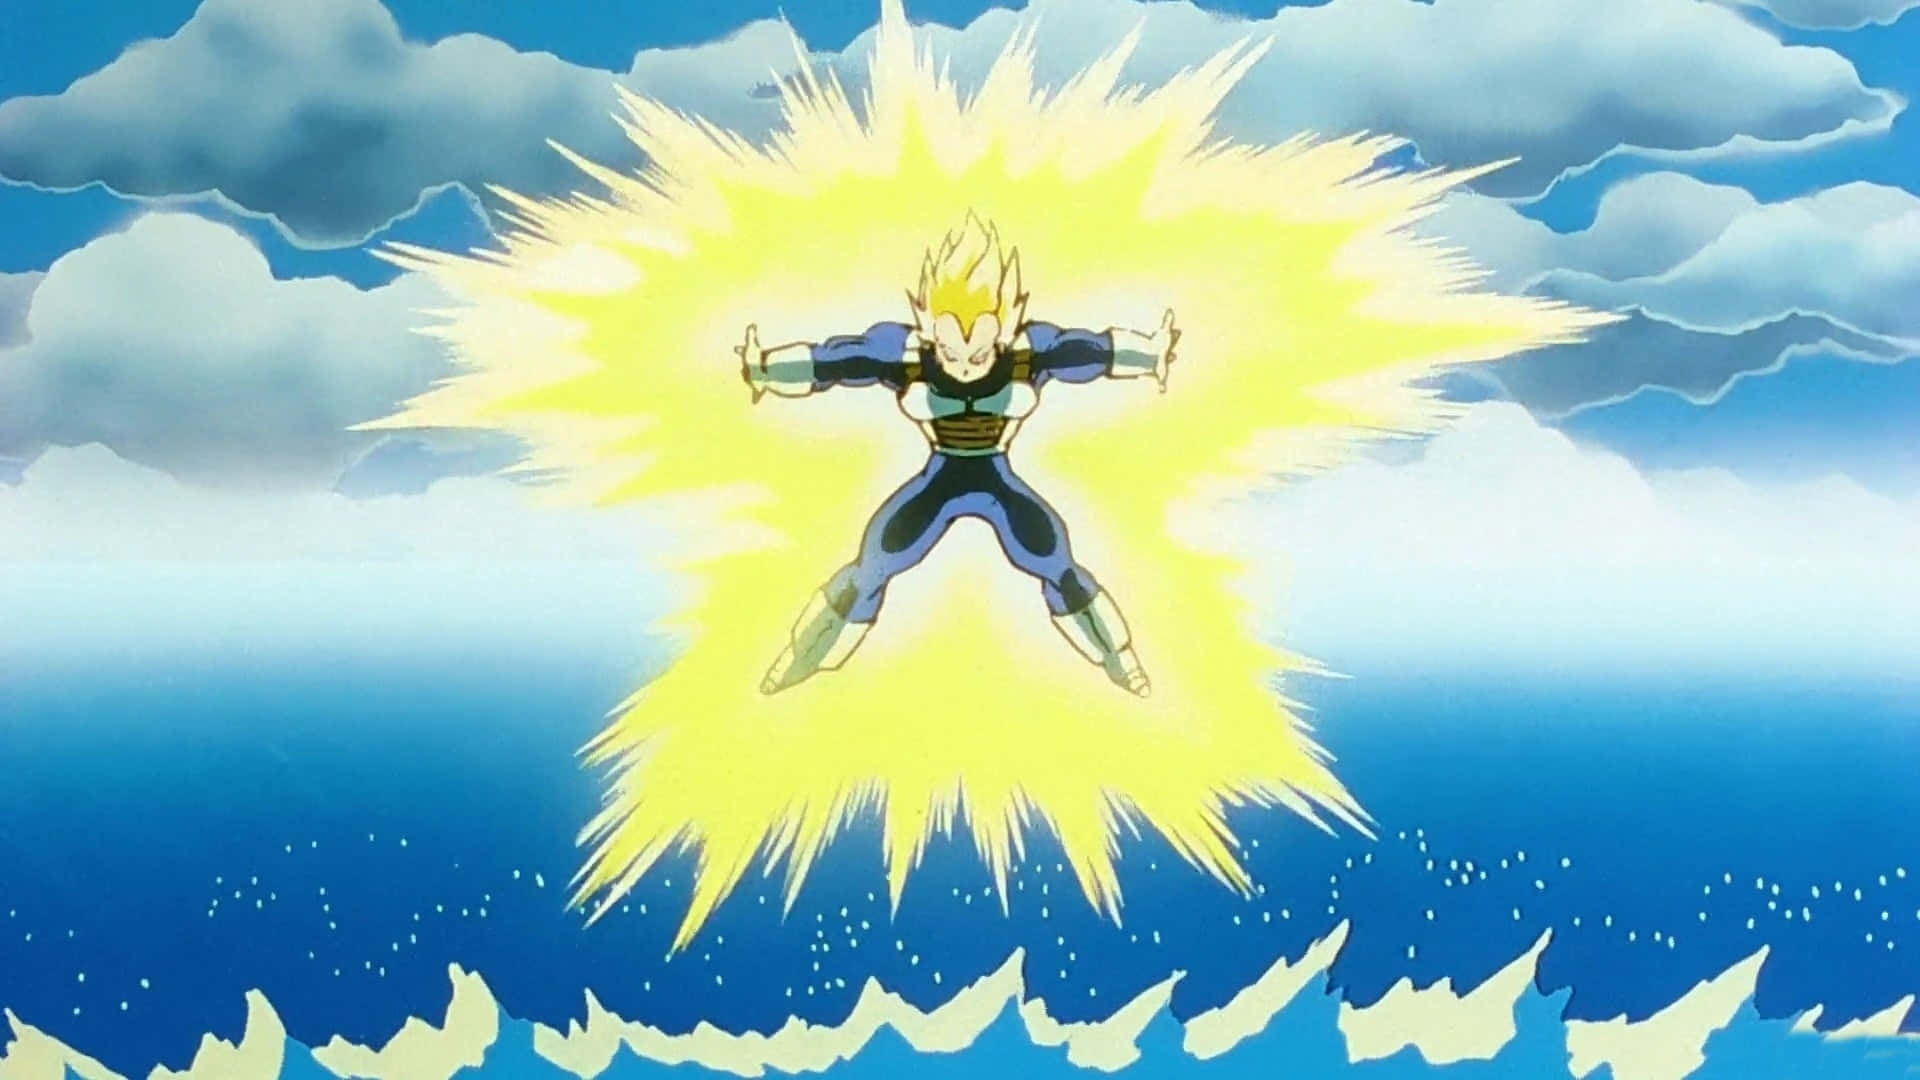 Vegeta unleashes his ultimate attack - the Final Flash" Wallpaper